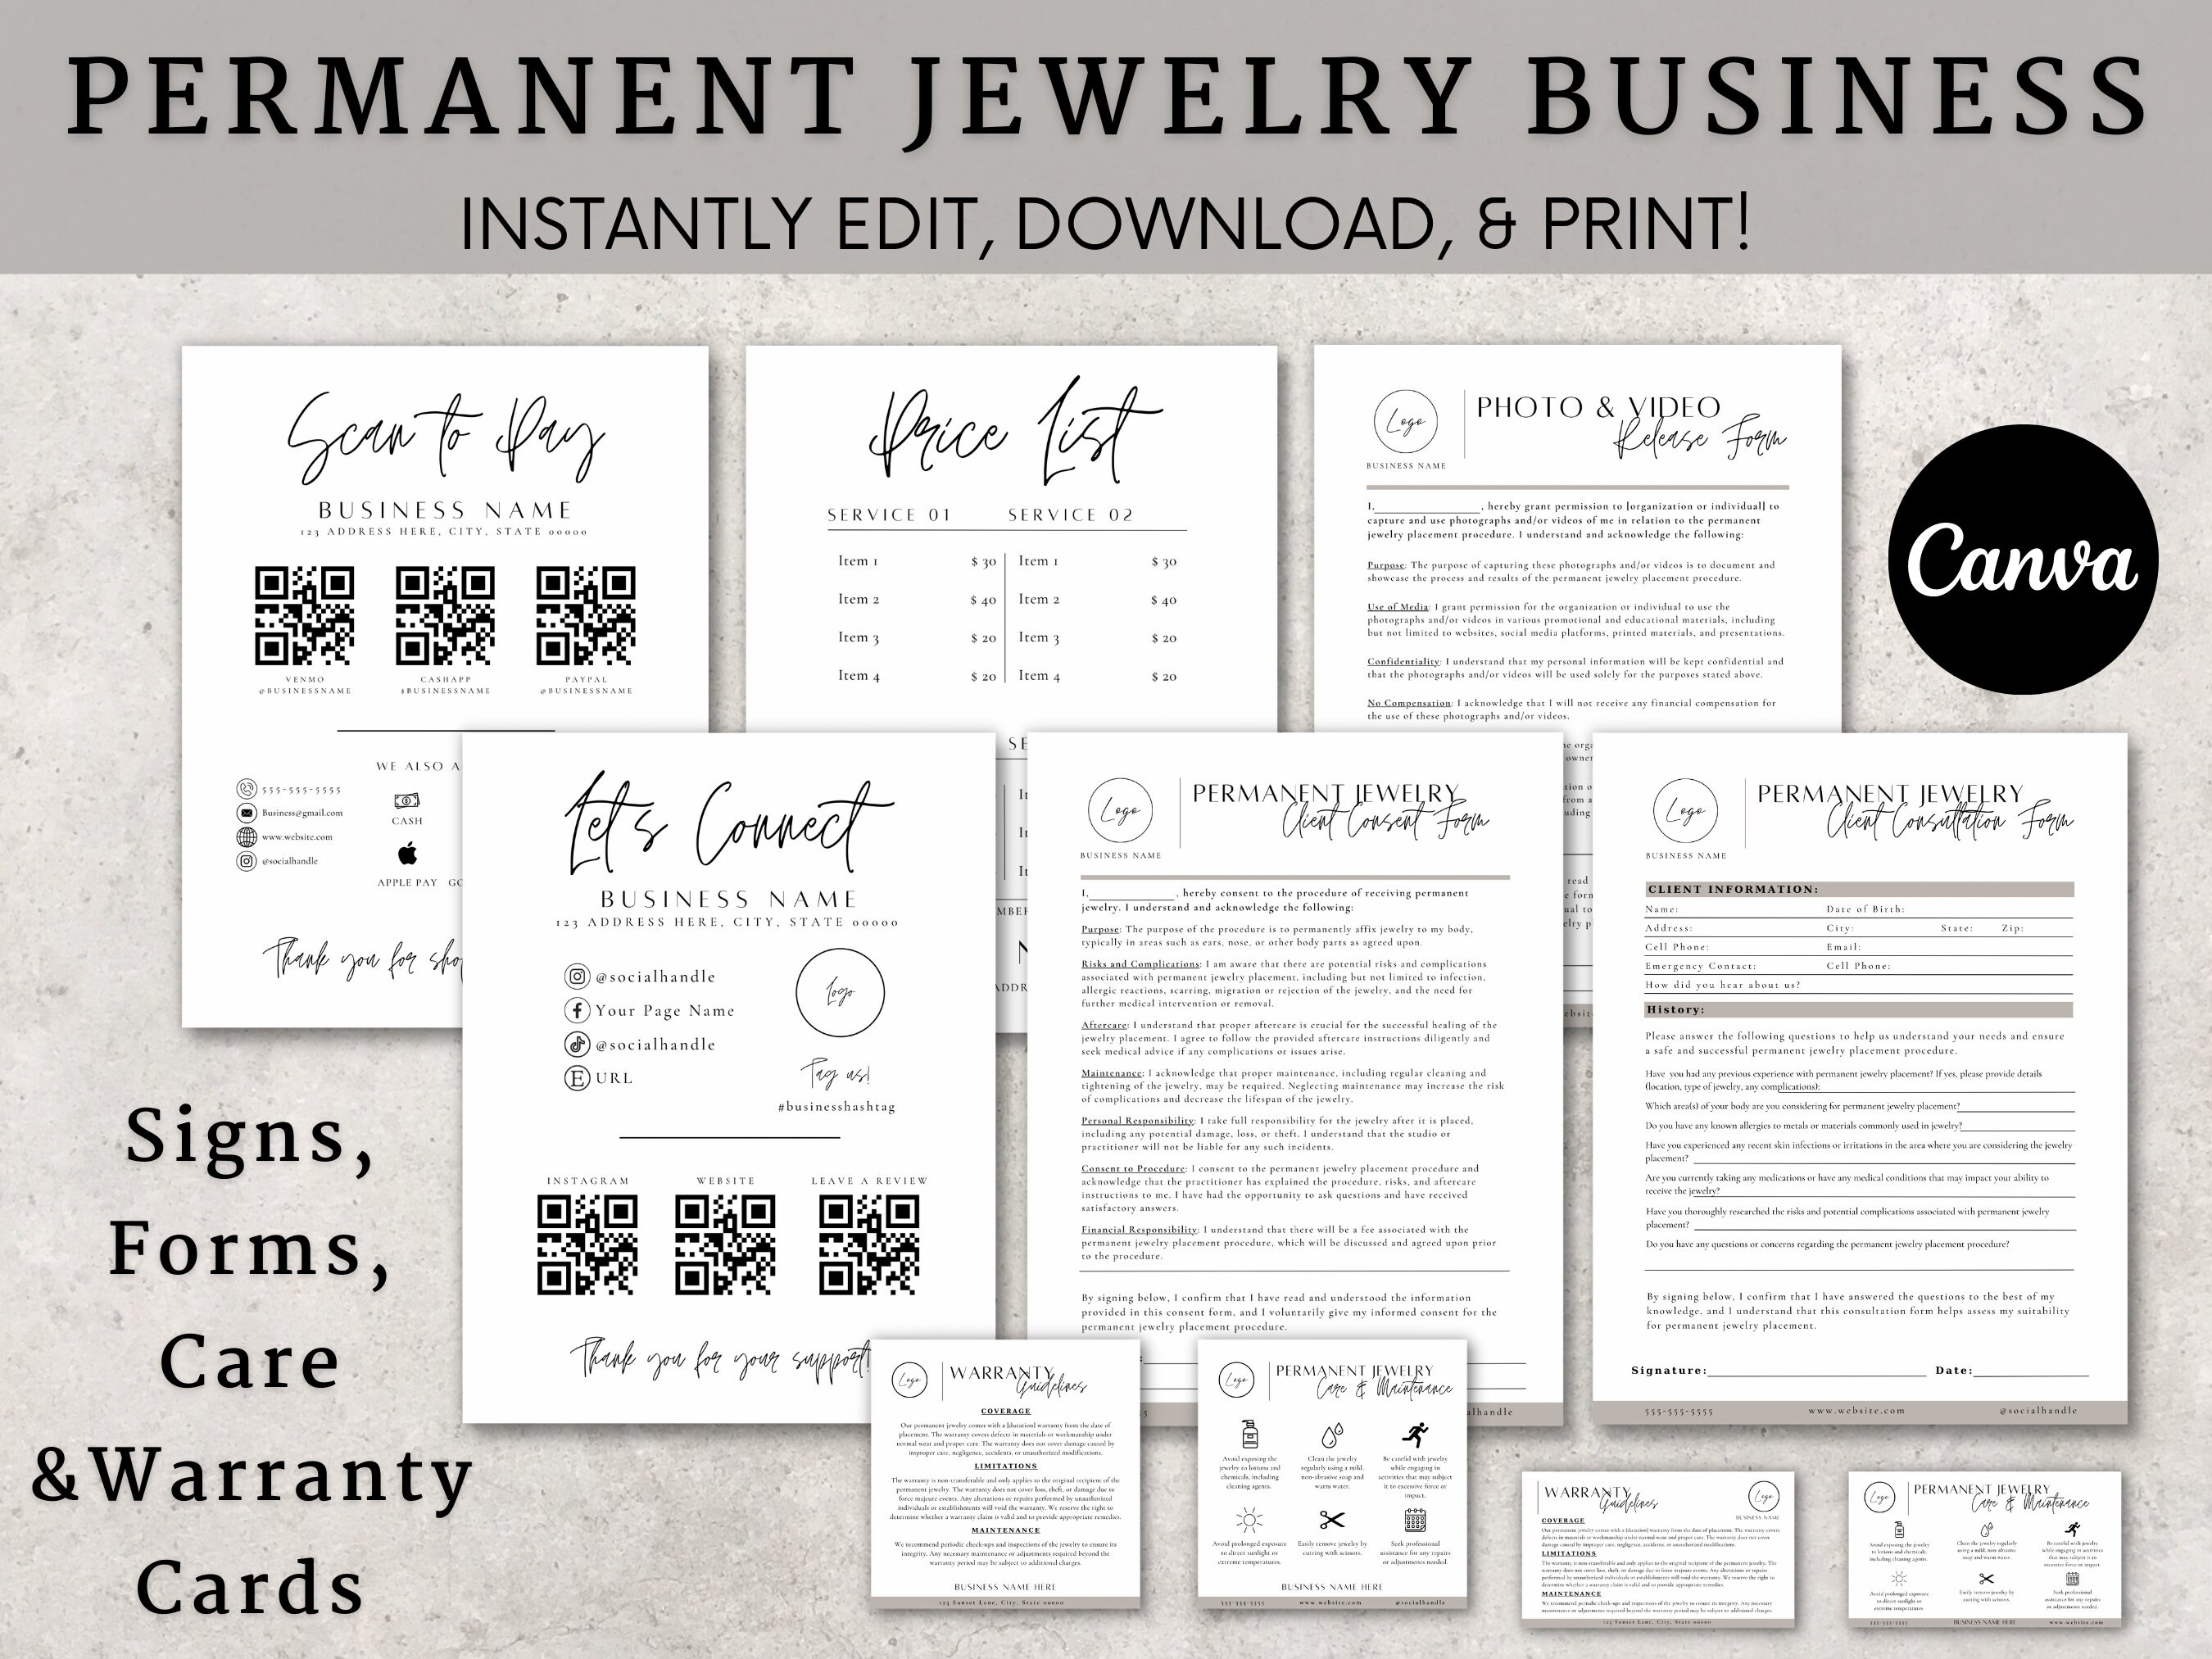 Pink Permanent Jewelry Care Card Template, DIY Permanent Jewelry